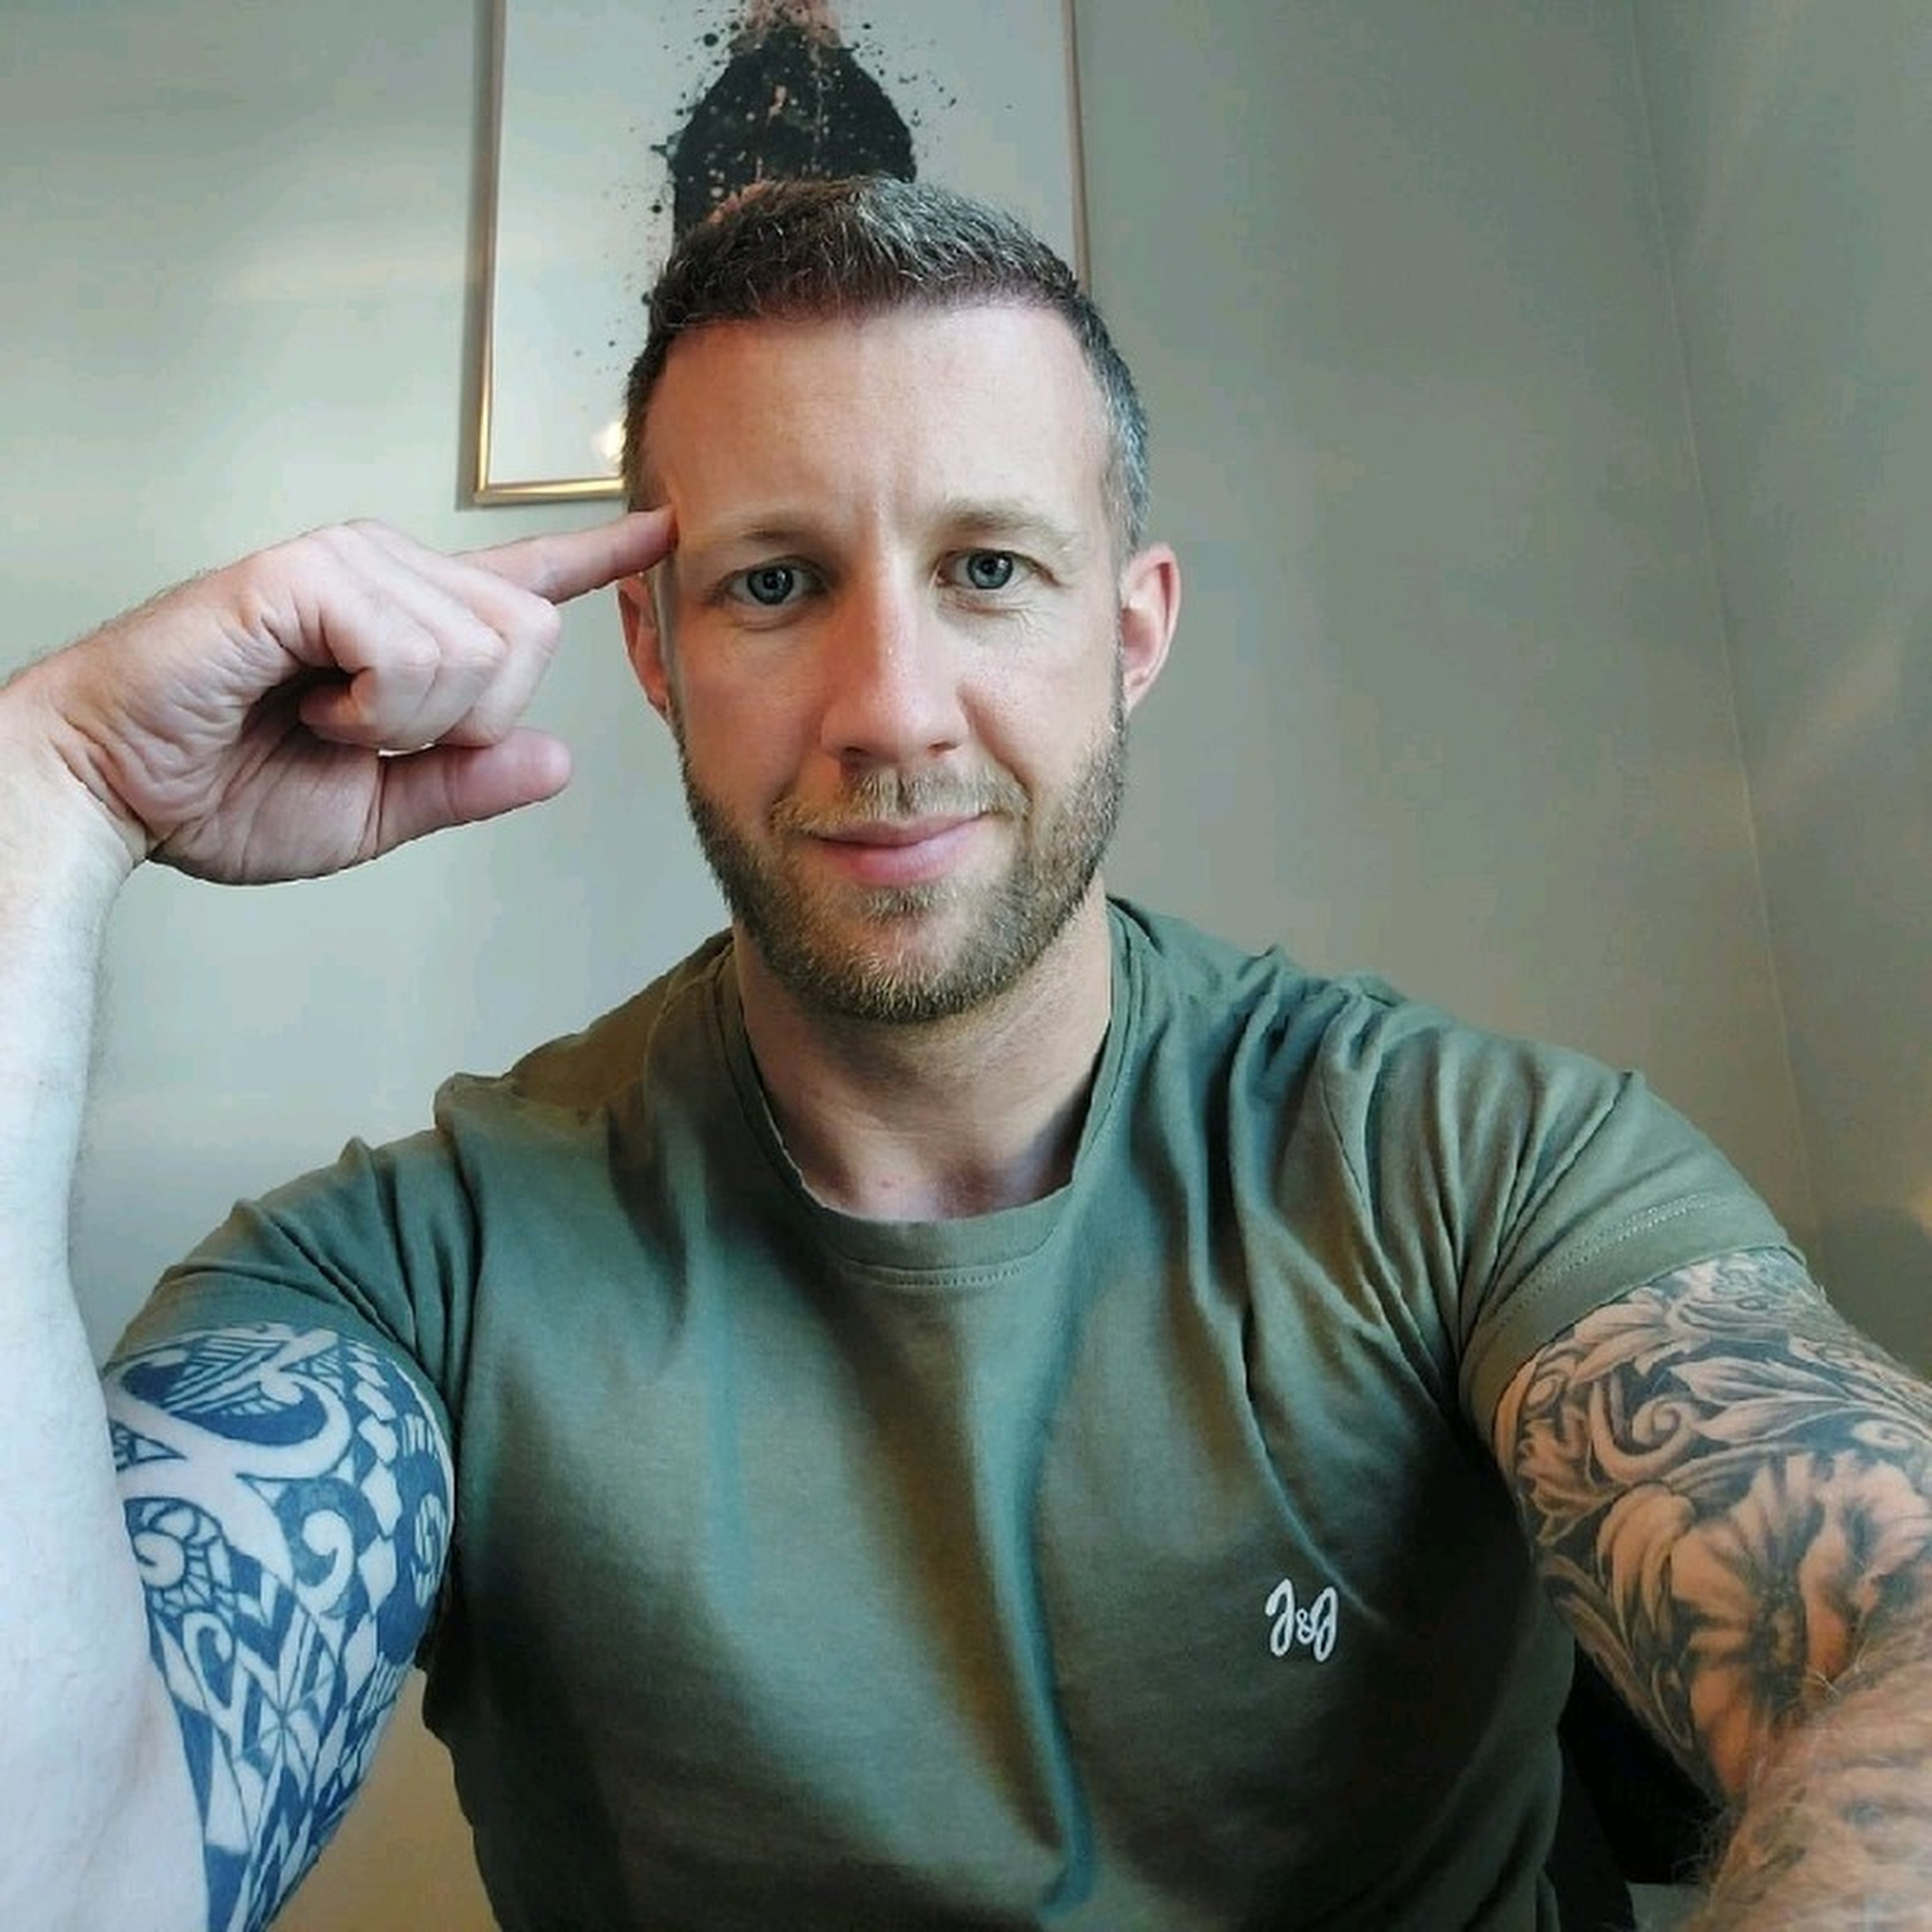 Police say the death of UK former soldier Matthew Trickett, who was accused of spying for Hong Kong alongside two others, was not suspicious. Photo: Linkedin